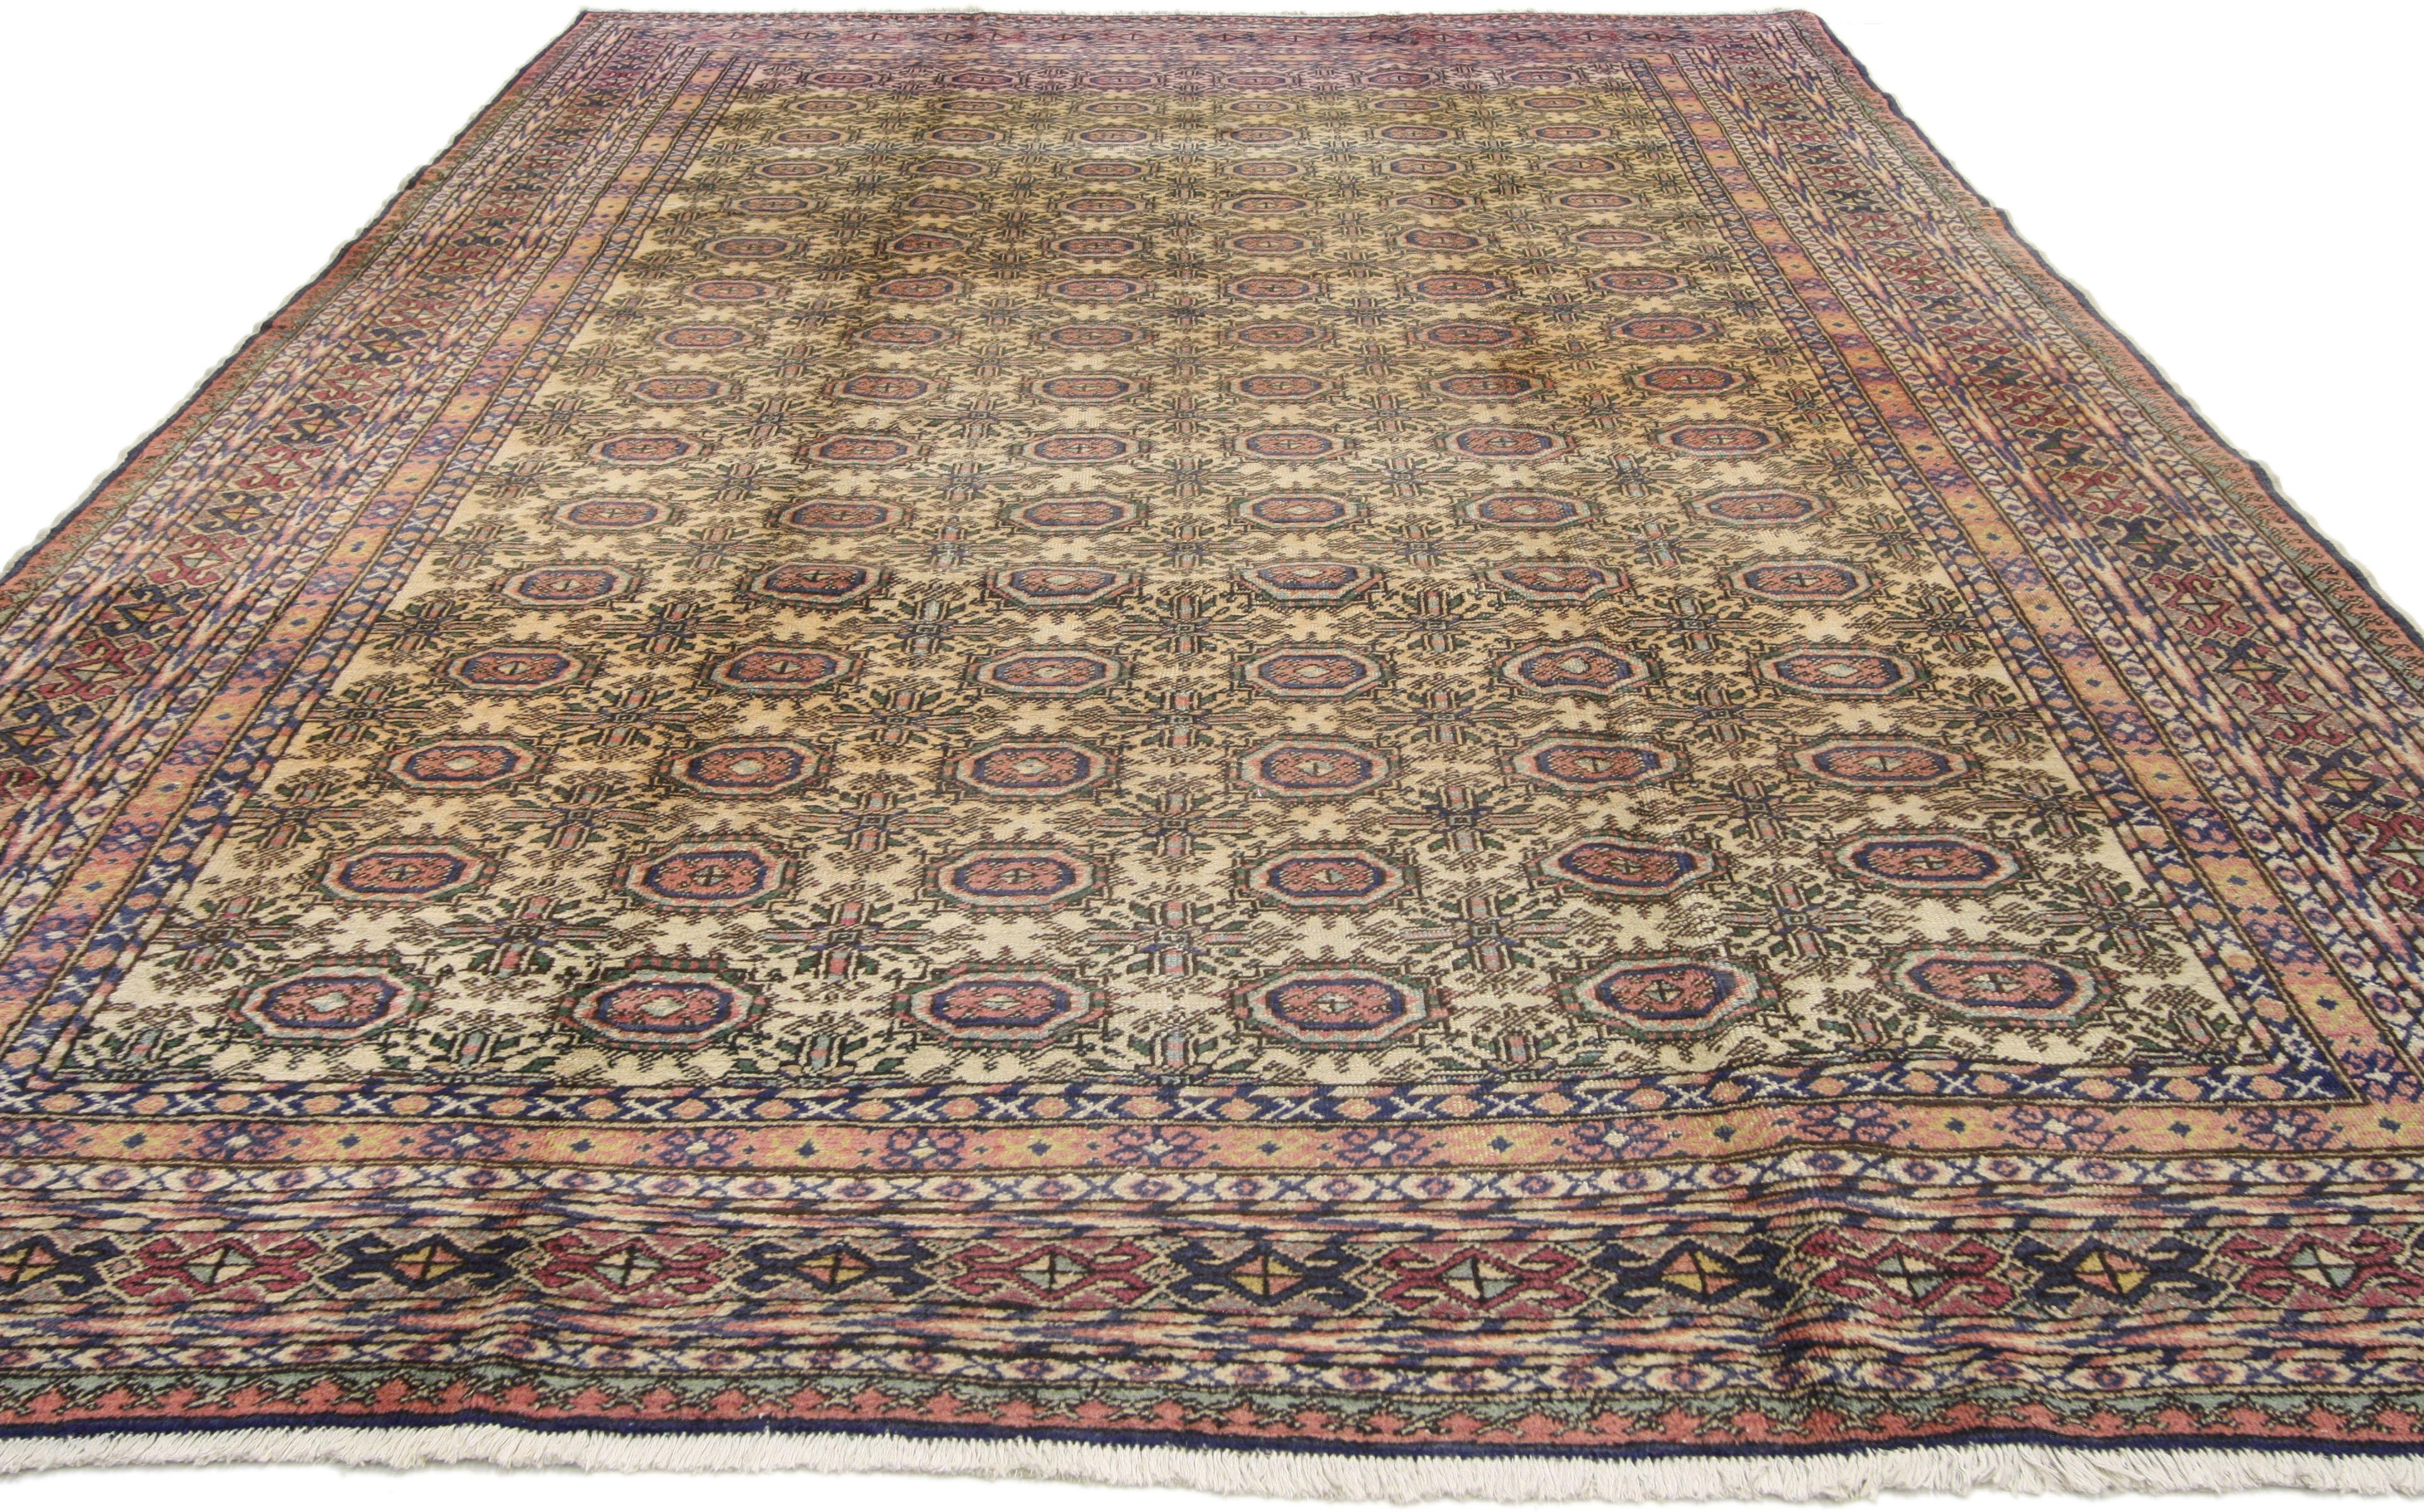 72681, vintage Turkish Sivas rug with Bohemian style, pink and purple hues. Luminous and densely ornamented, this hand-knotted wool vintage Turkish Sivas rug with Traditional Style features an all-over geometric pattern of octagons and cross motifs.